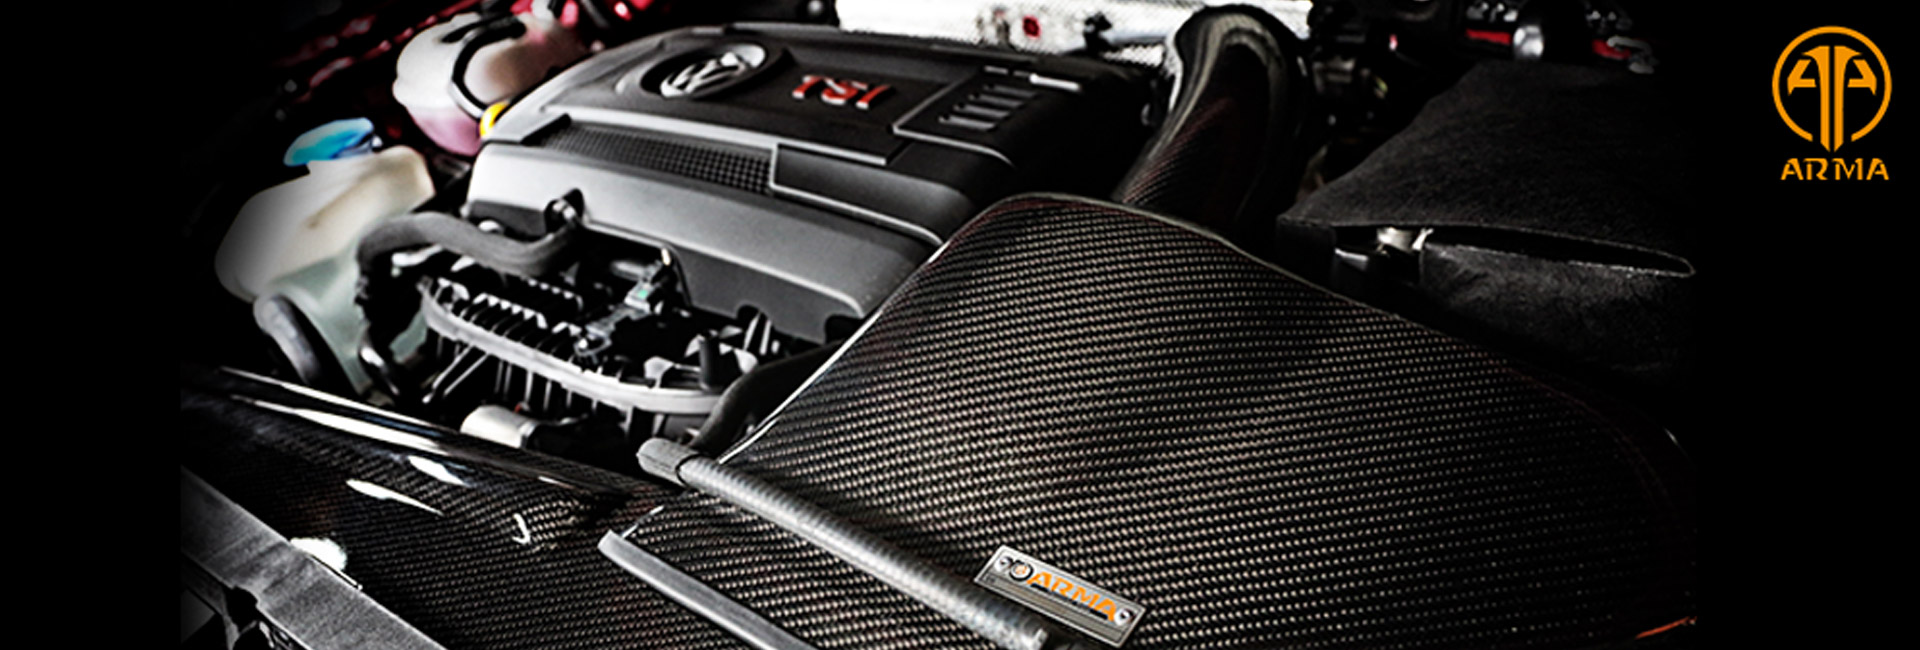 Armaspeed Europe Blog - Carbon cold air intake - Upgrade your Volkswagen Golf 7 GTI to beast mode with an ARMA Speed Cold Air Intake